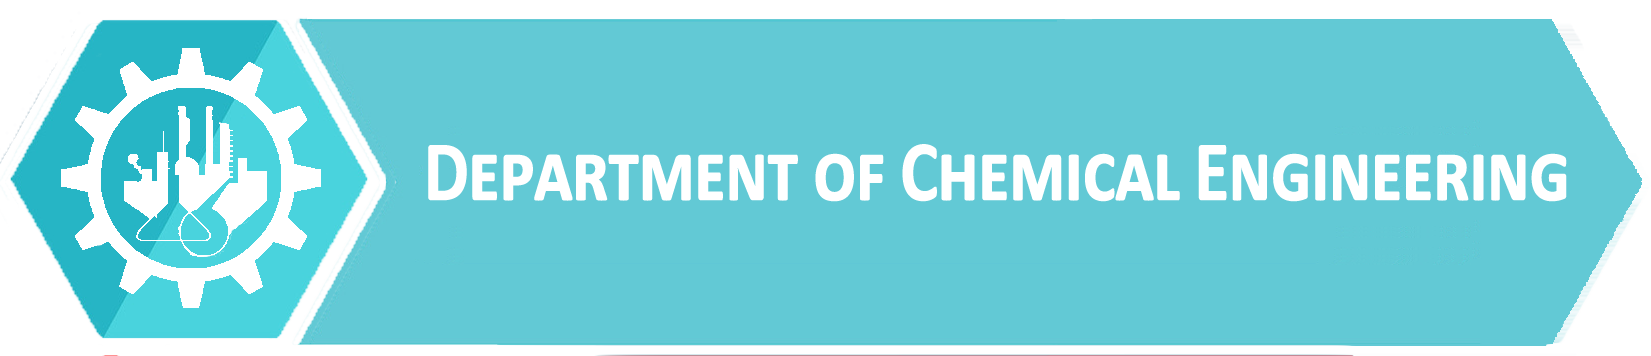 Department of Chemical Engineering